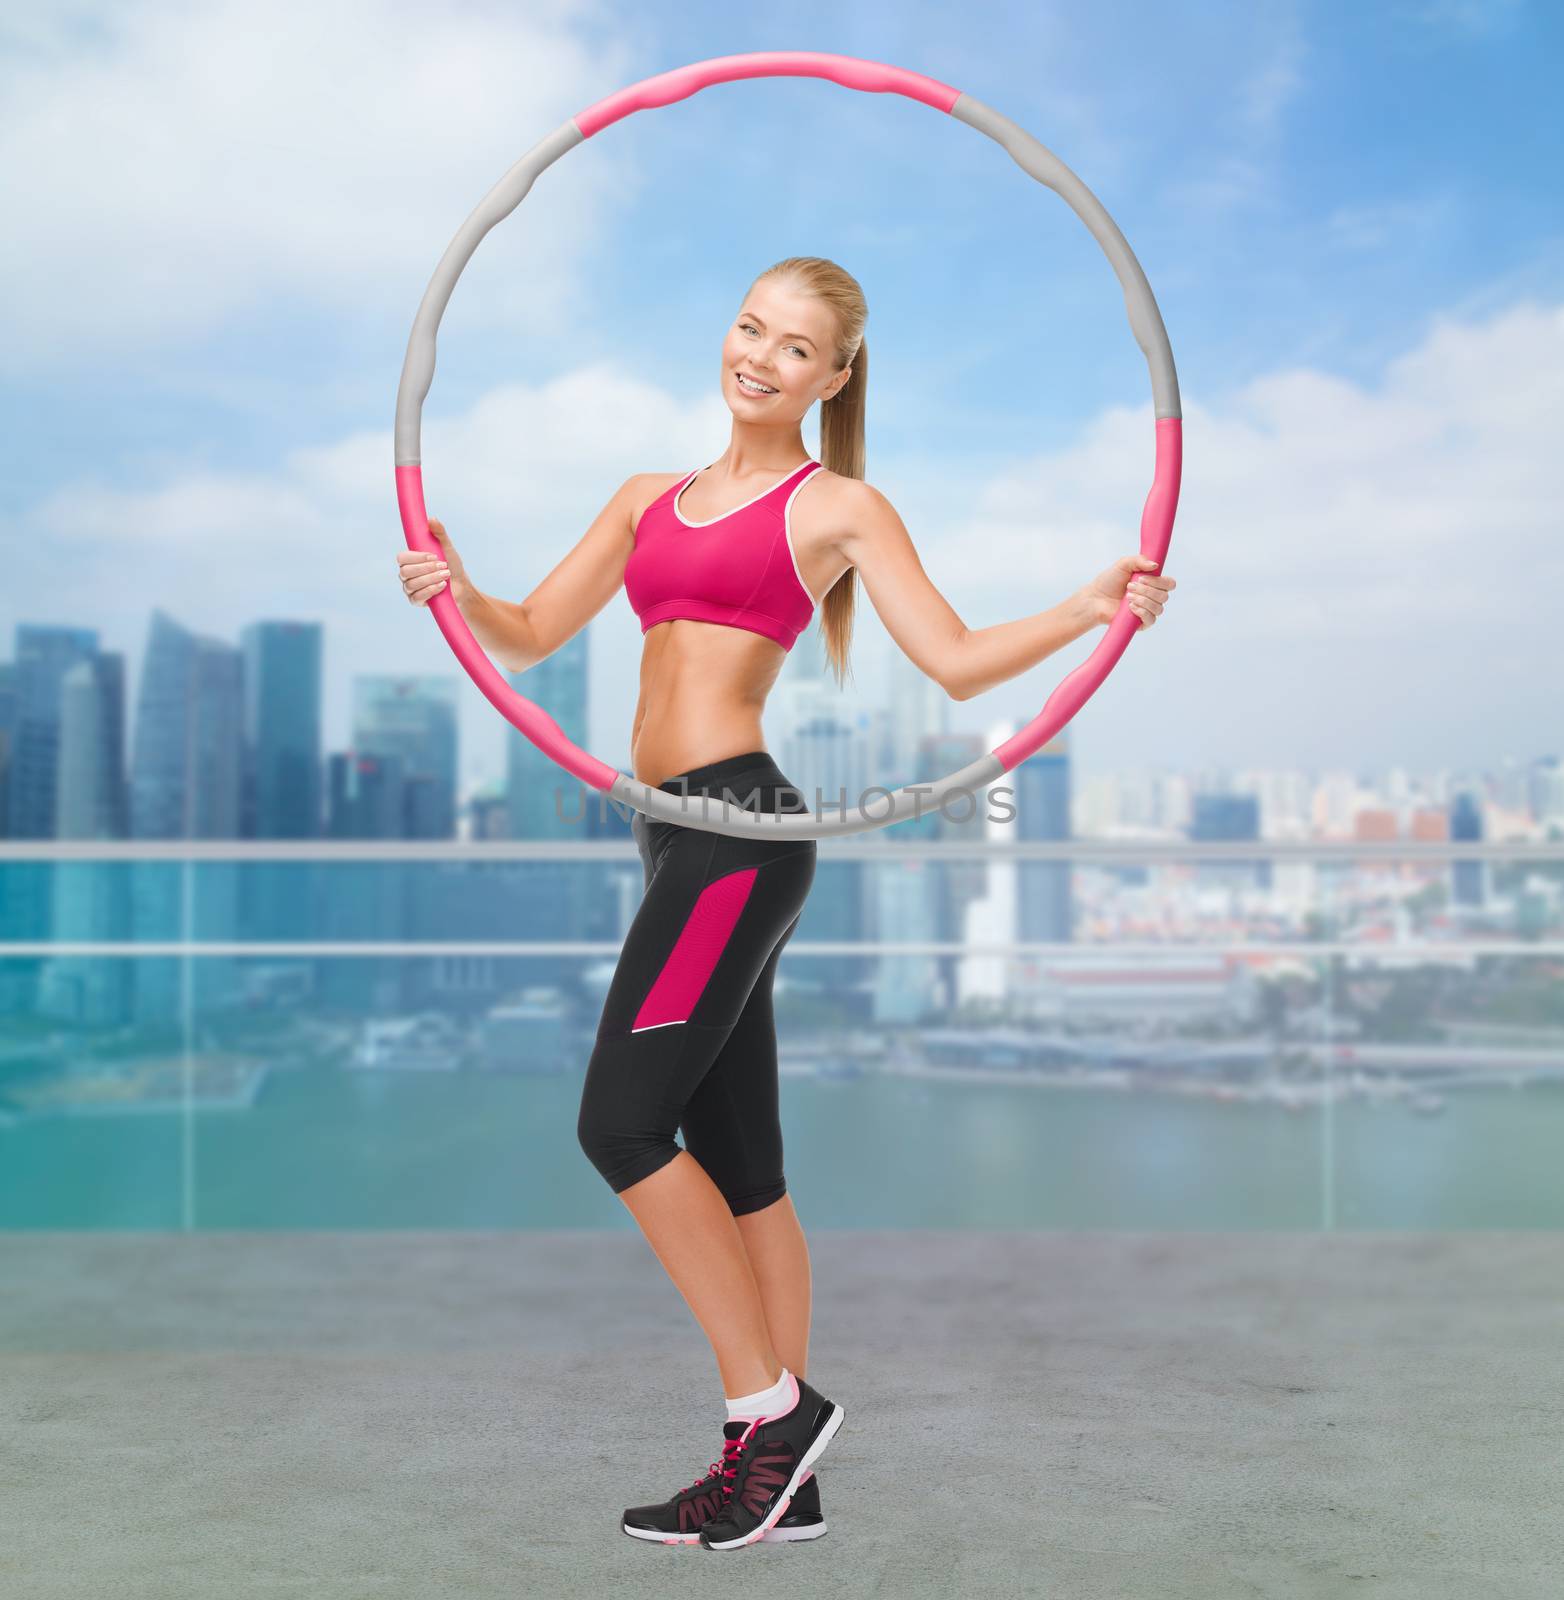 fitness, sport, people and healthcare concept - young sporty woman exercising with hula hoop over city waterside background